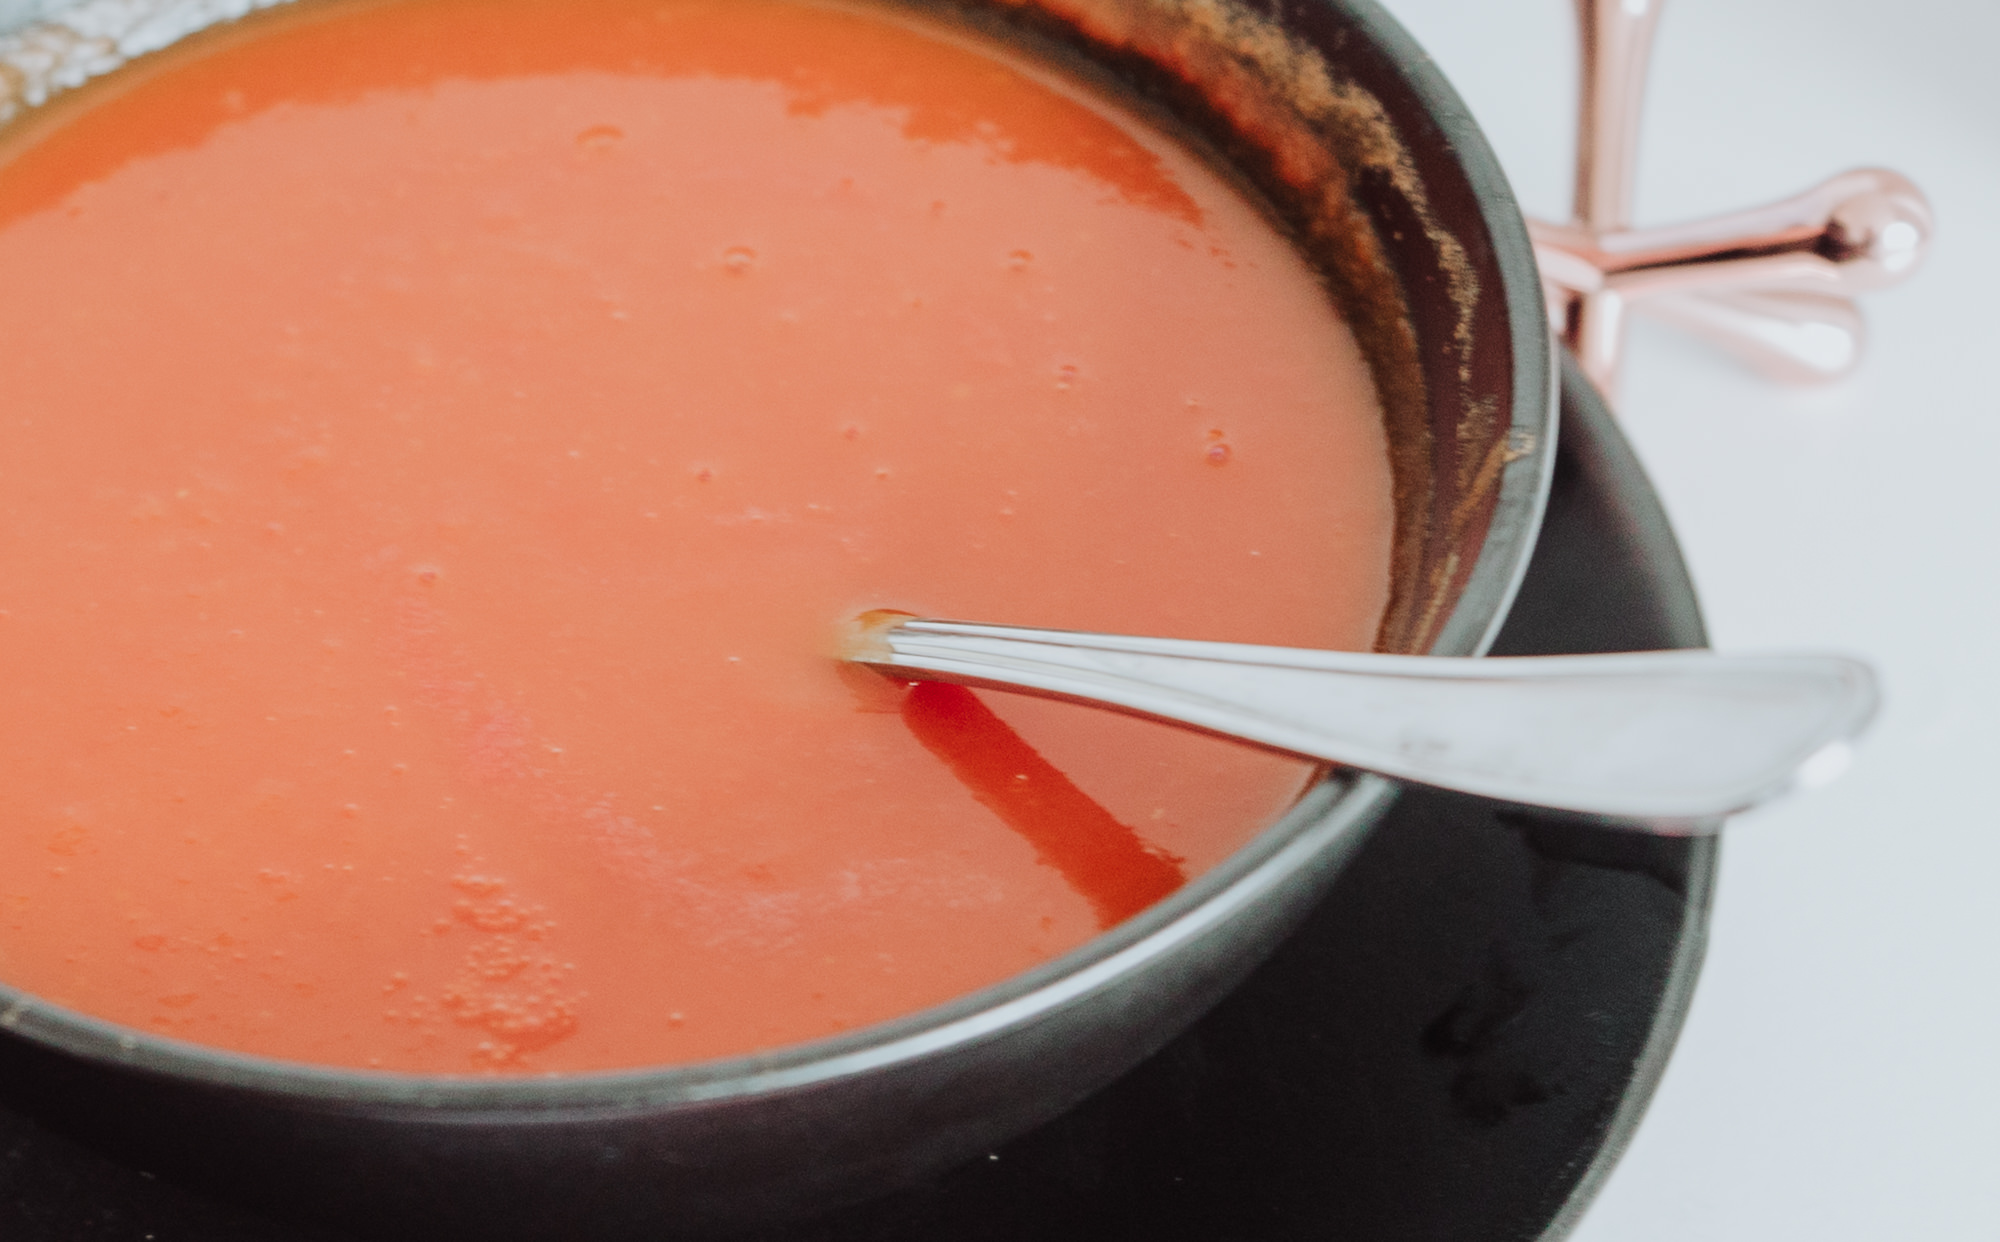 Slimming World Tomato Soup that tastes just like Heinz (but Syn Free!)